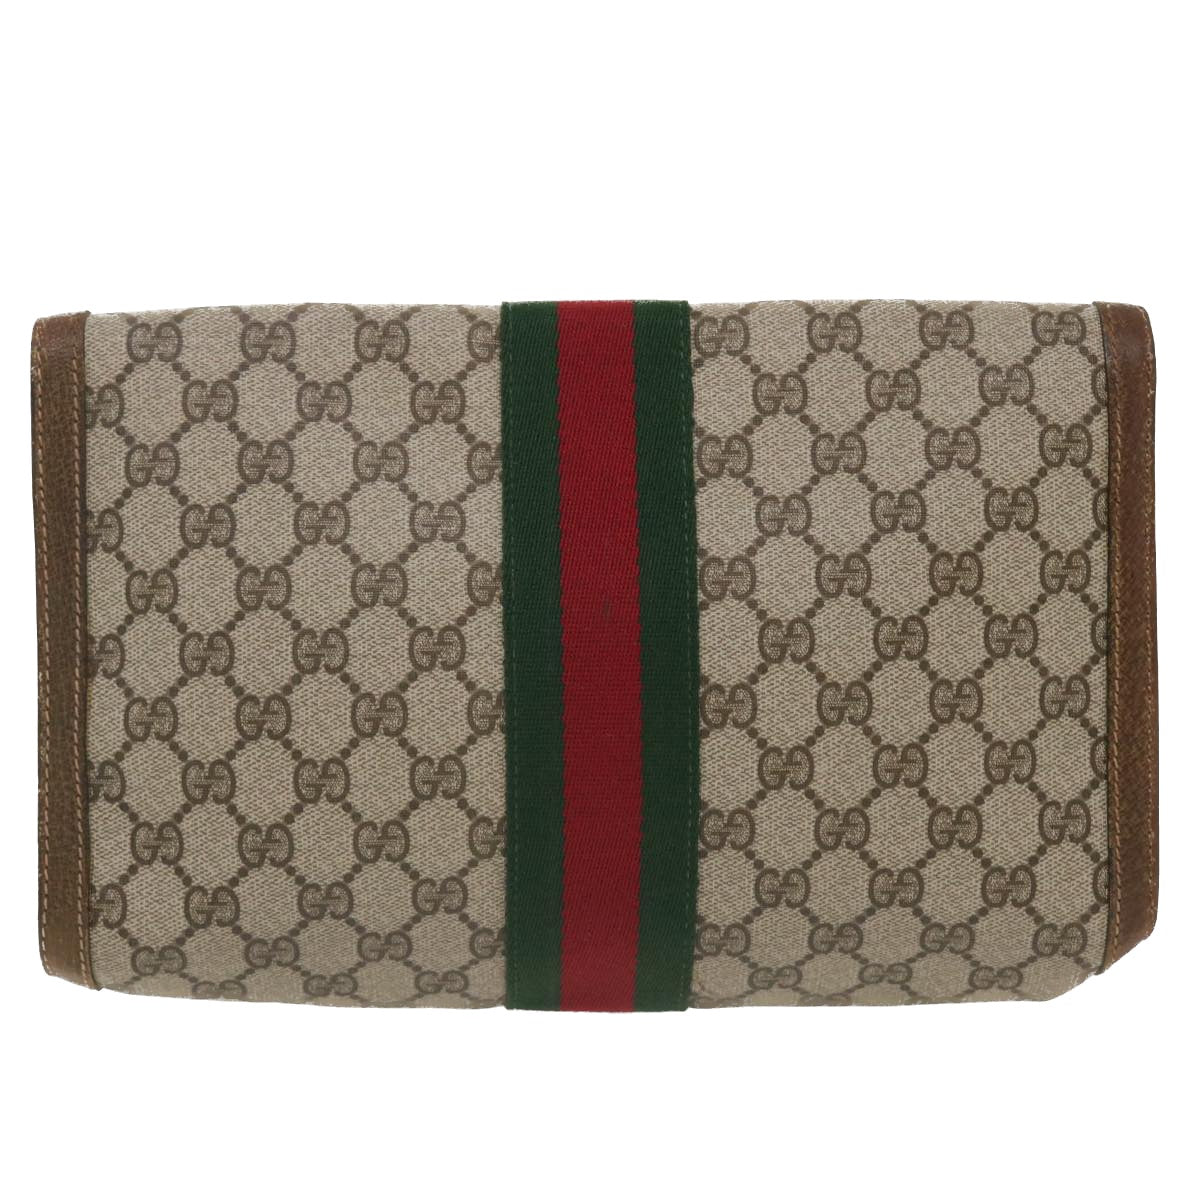 GUCCI GG Canvas Web Sherry Line Clutch Bag Beige Red Green 37-02-3839 Auth ny155 - 0